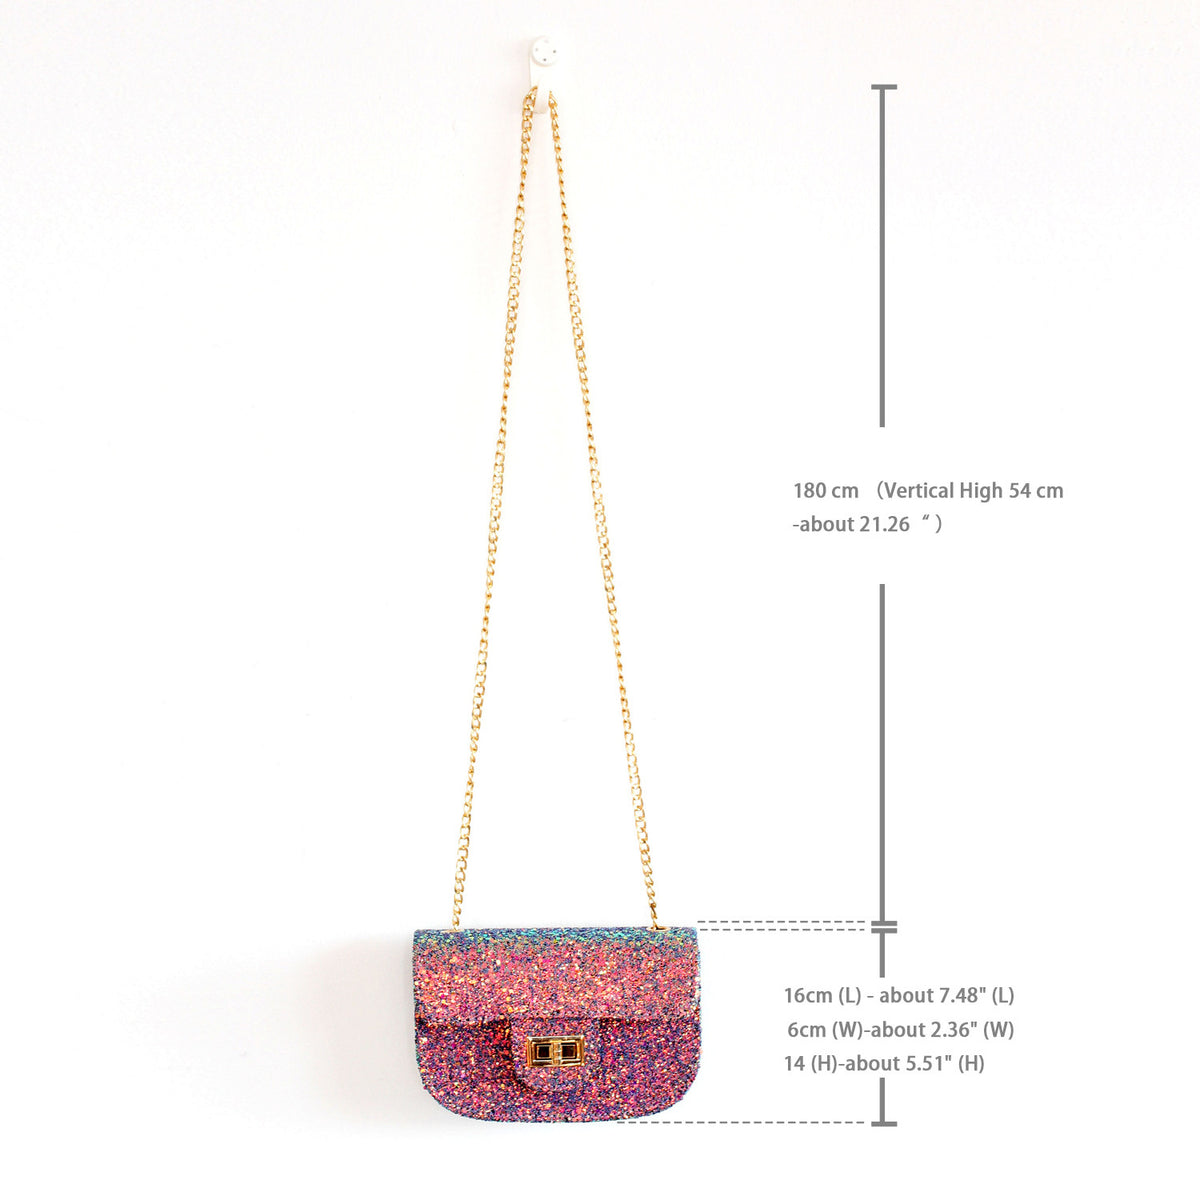 Reversible Sequined Chain Bag - worthtryit.com